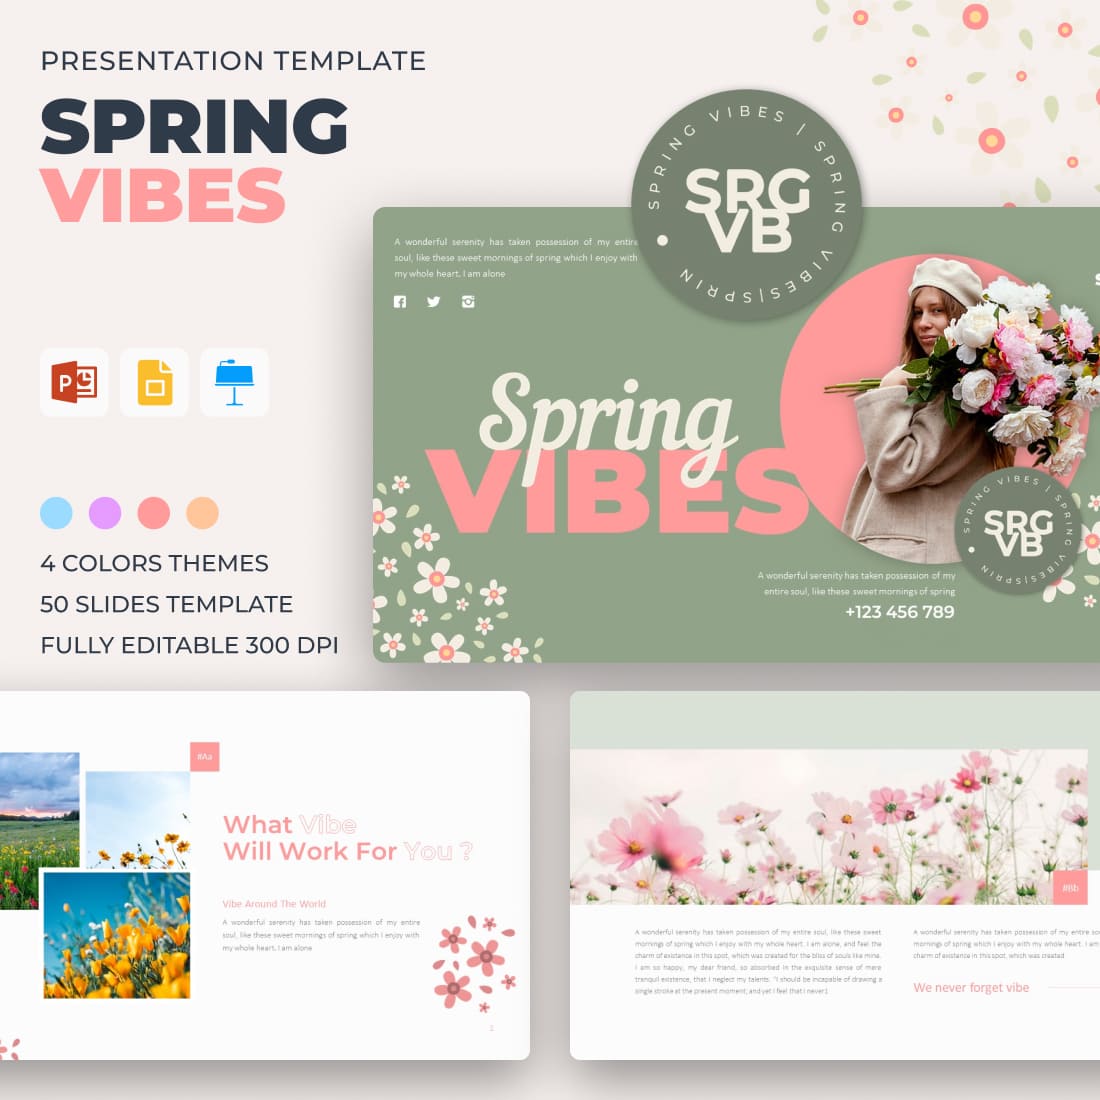 Spring Vibes Presentation Template - main image preview.